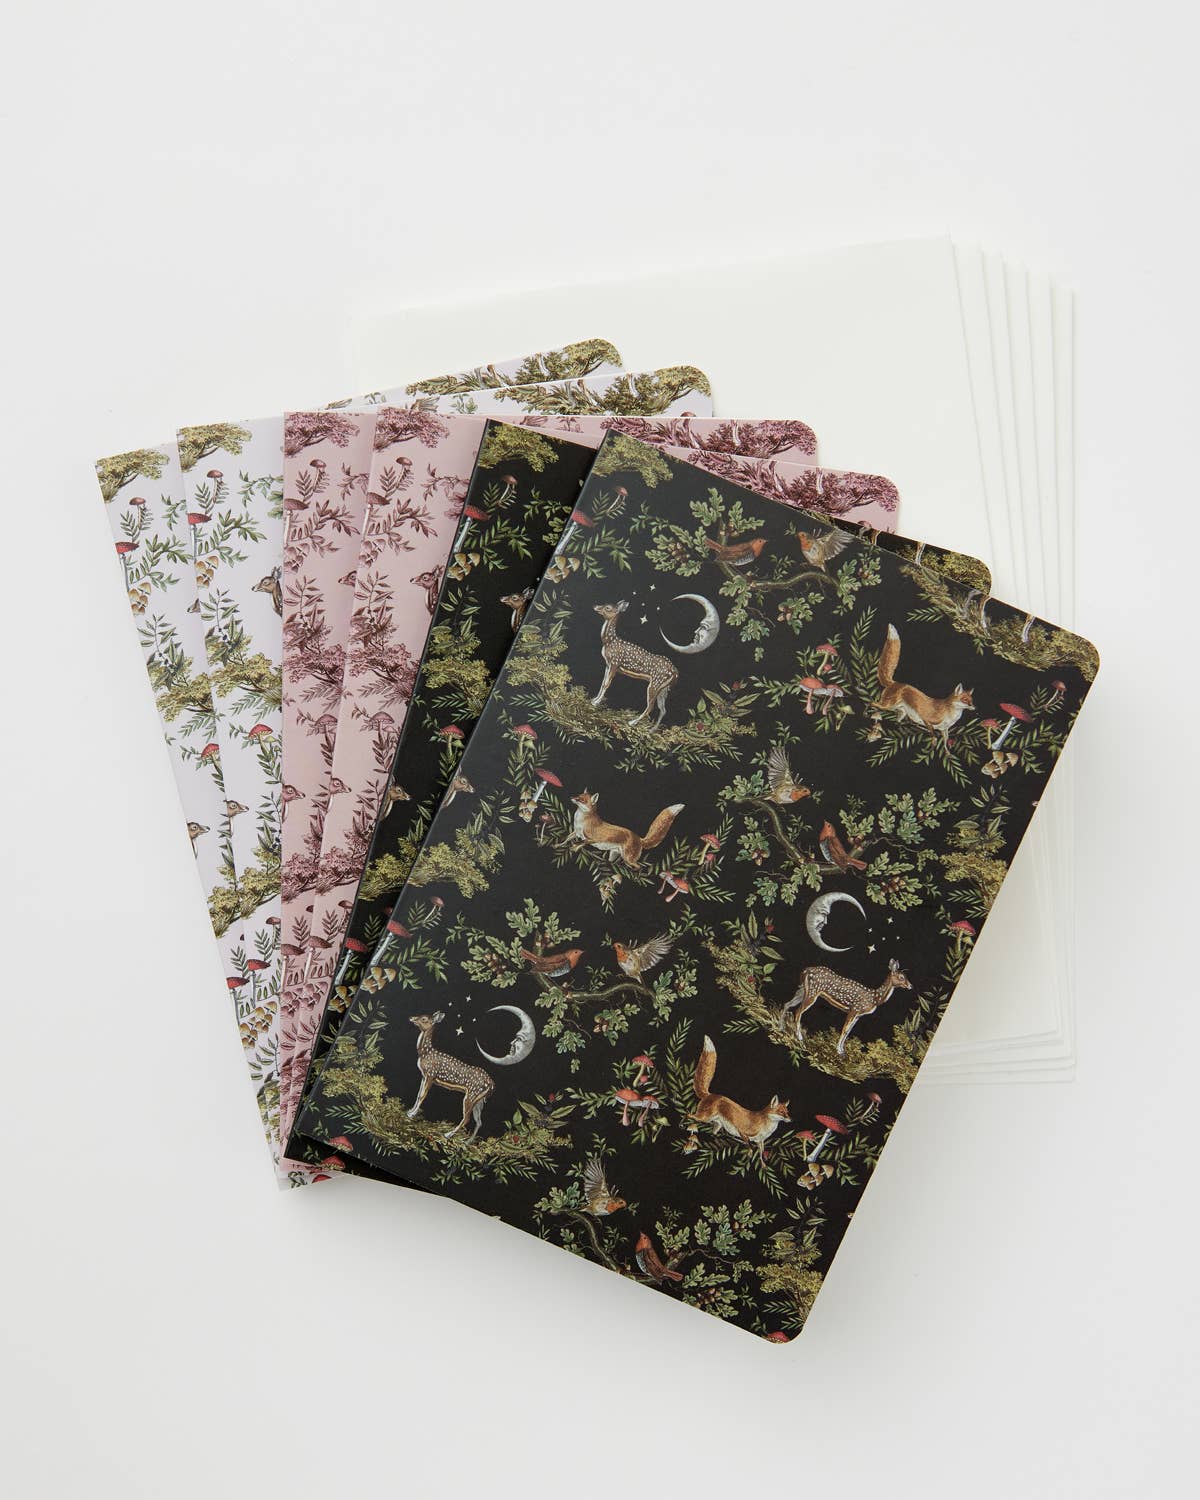 FABLE A Night's Tale Woodland Notecards - Pack of 6 - Out of the Blue